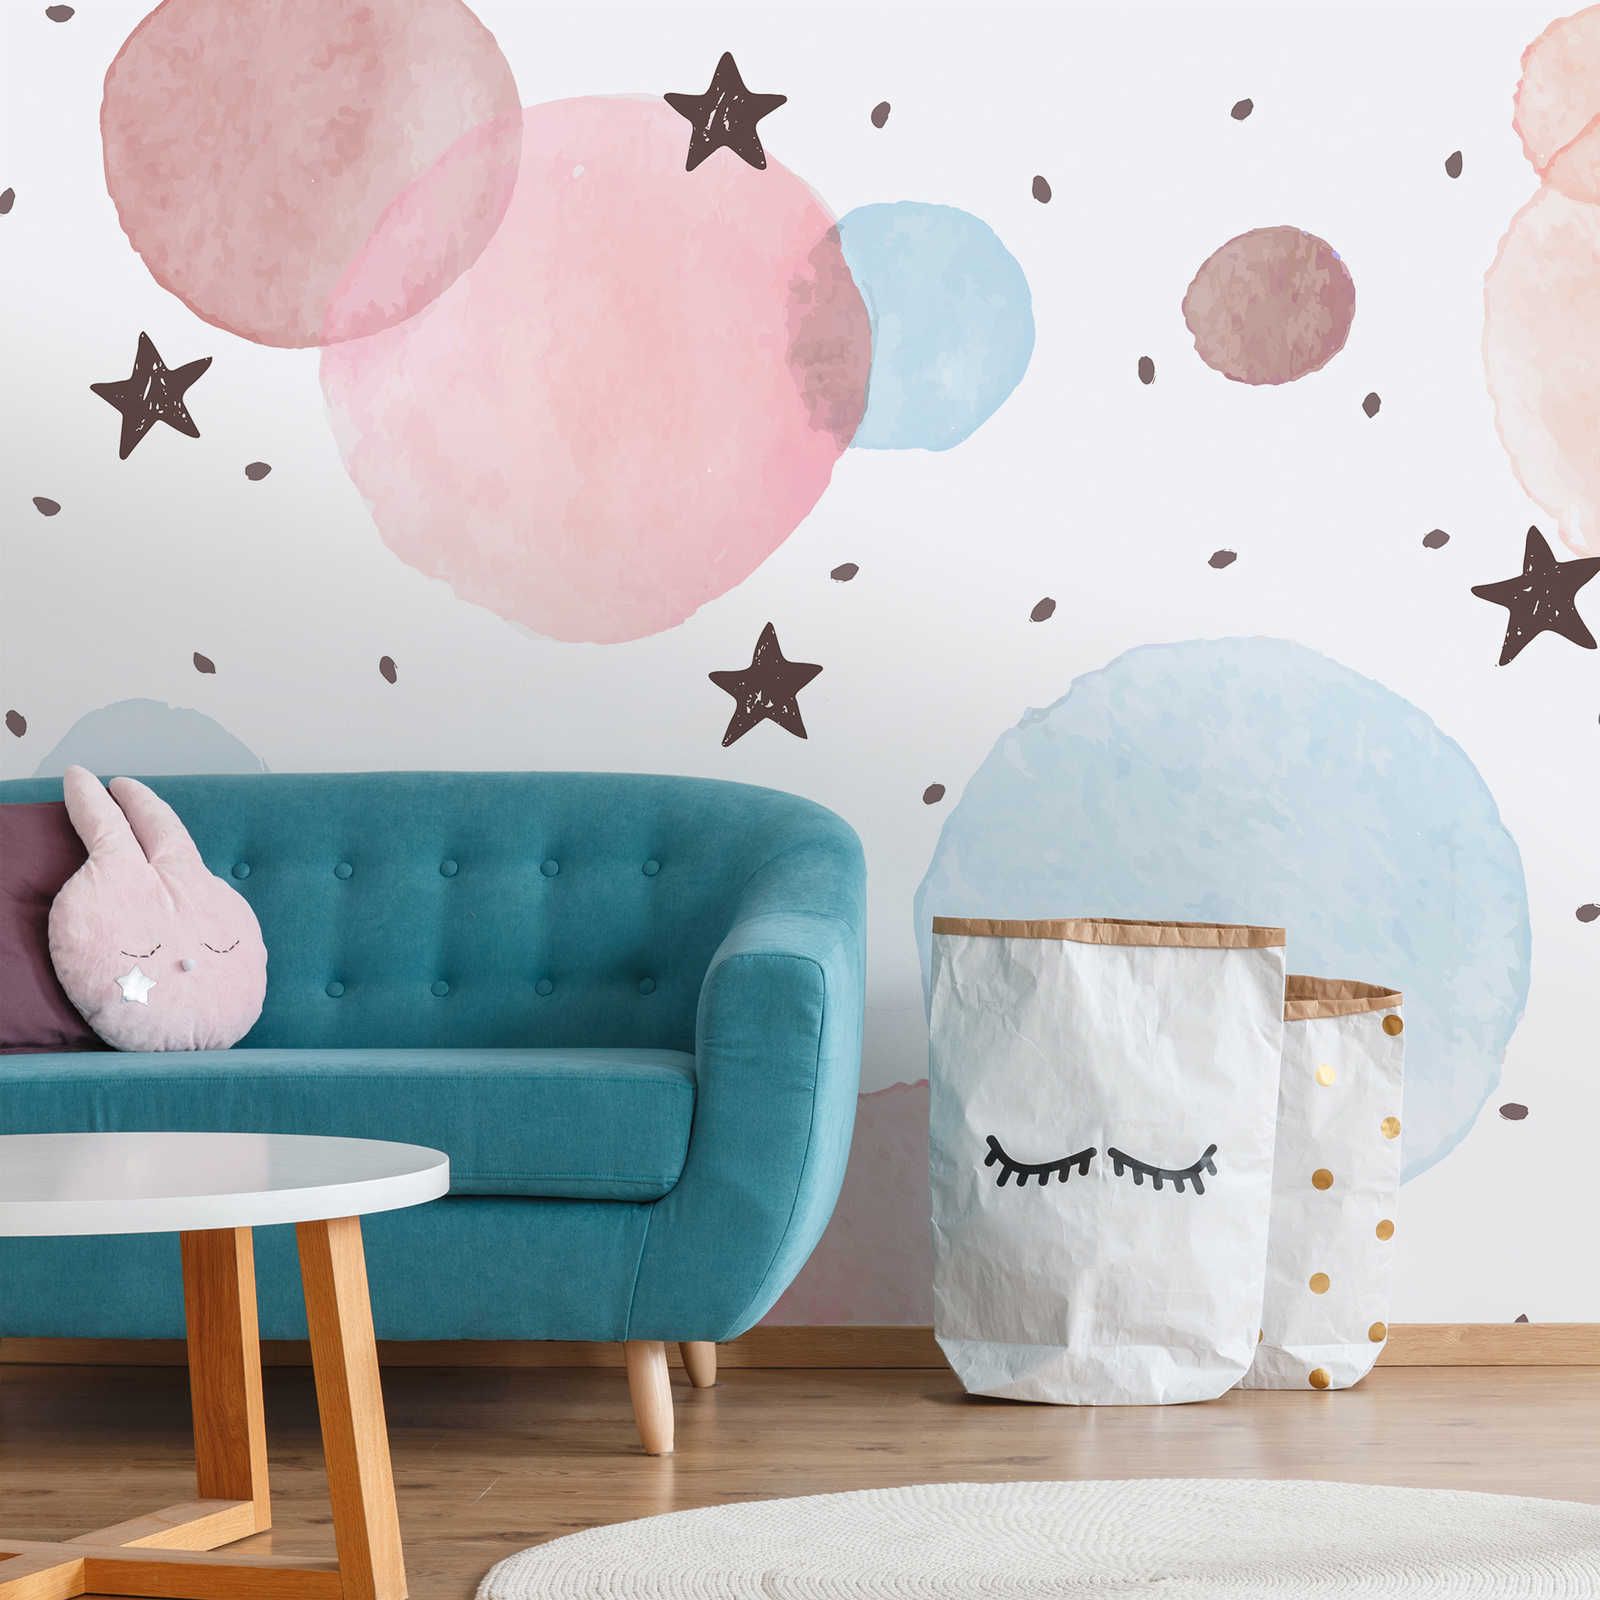 Photo wallpaper for children's room with stars, dots and circles - Smooth & pearlescent fleece
